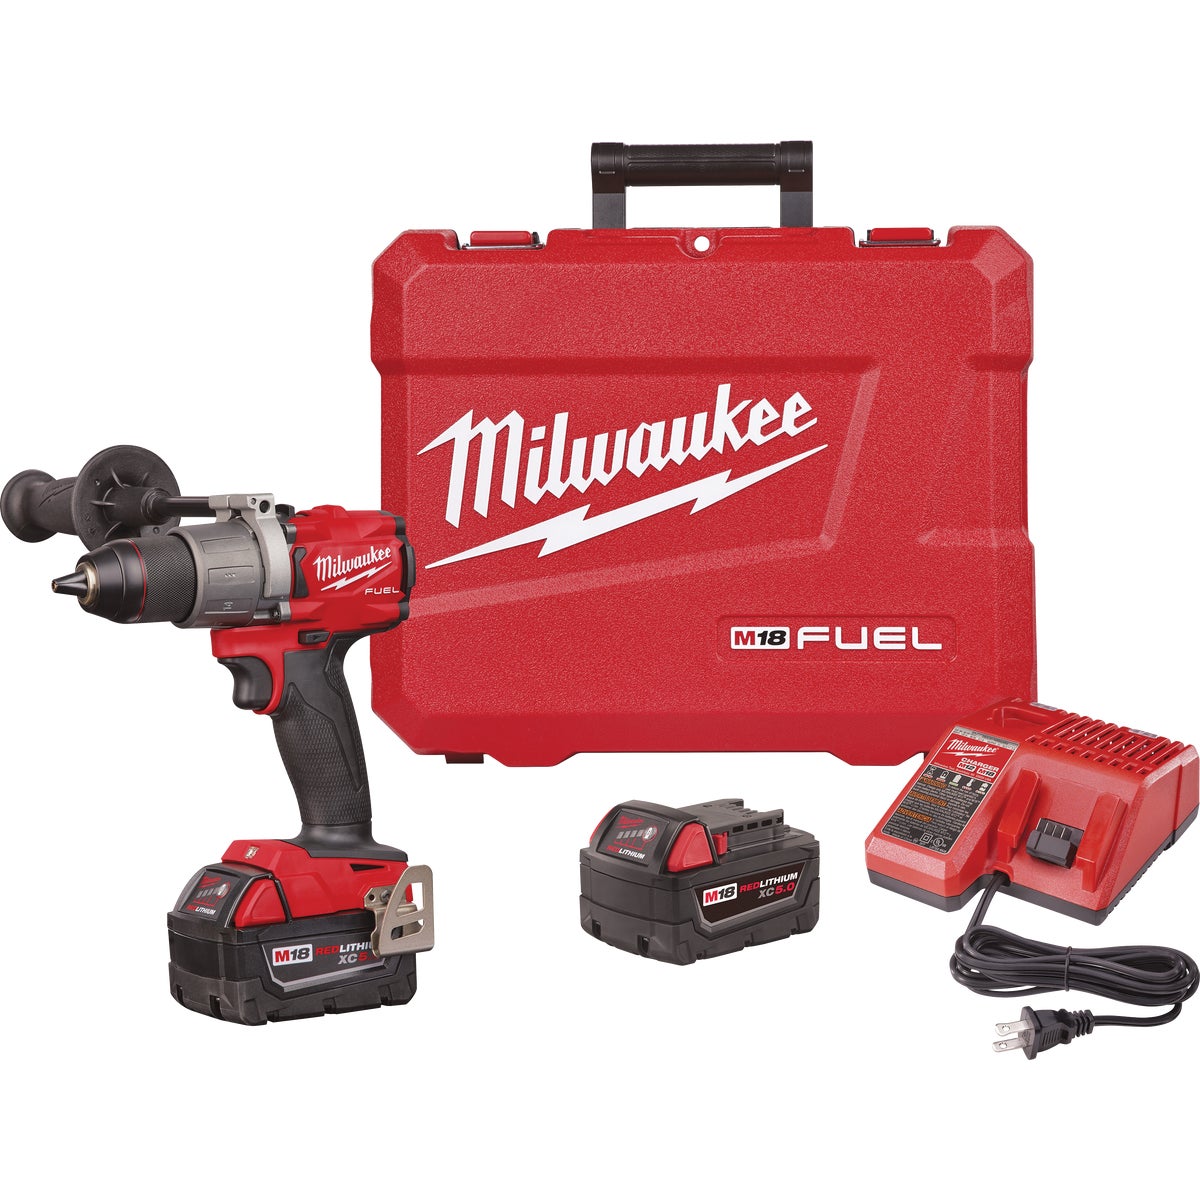 Milwaukee M18 FUEL Brushless 1/2 In. Cordless Drill/Driver Kit